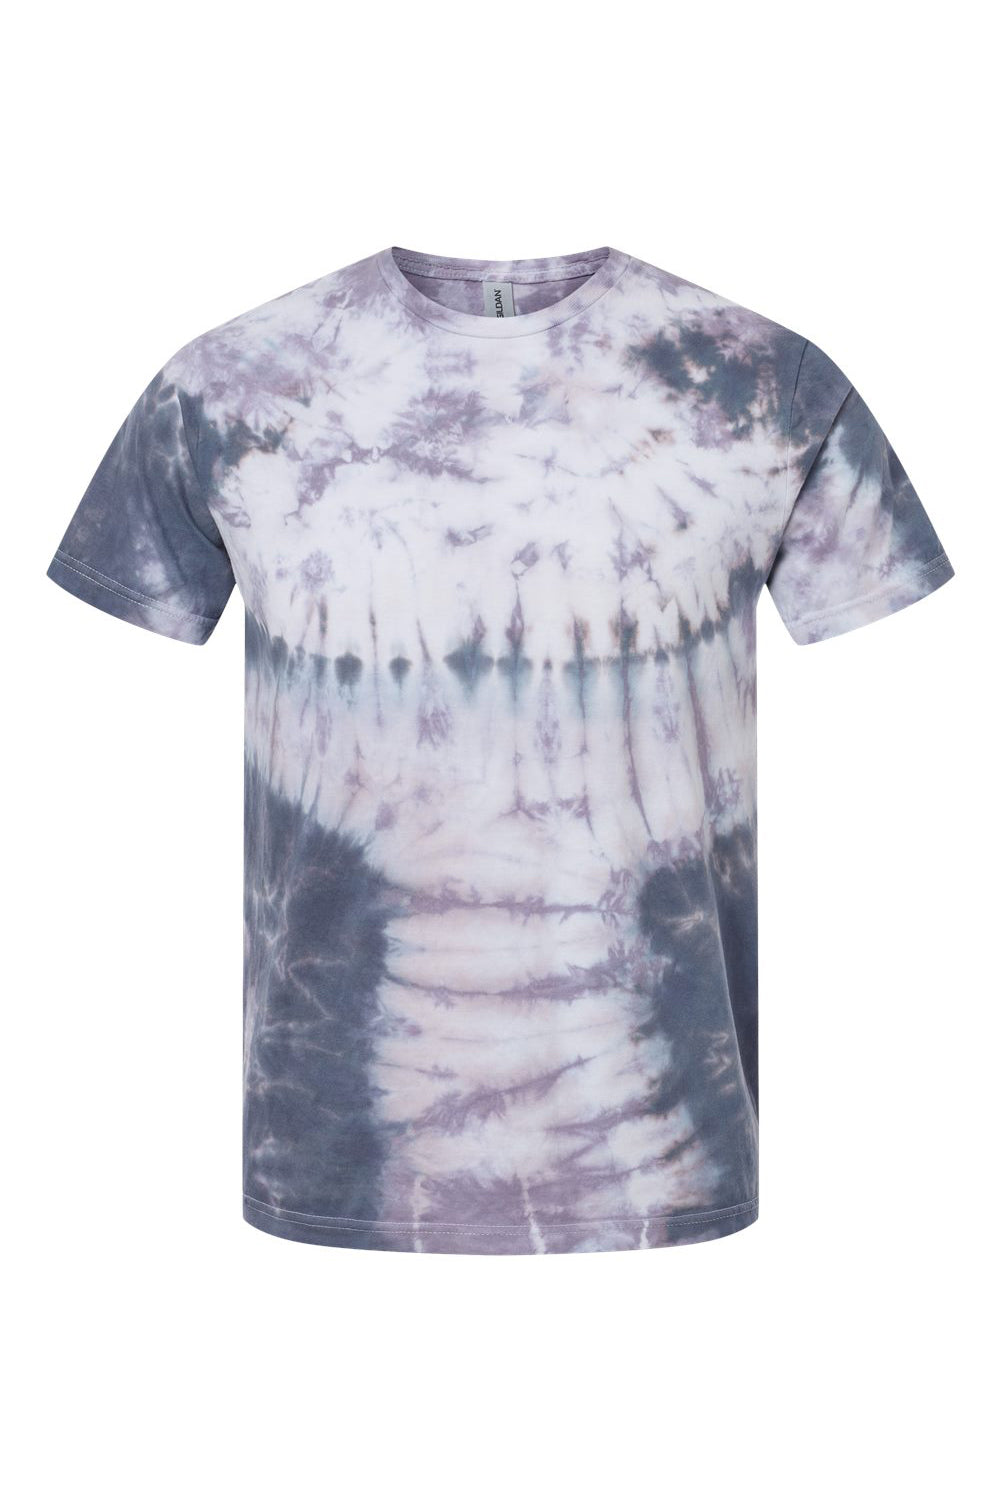 Dyenomite 640LM Mens LaMer Over Dyed Crinkle Tie Dyed Short Sleeve Crewneck T-Shirt Arctic Flat Front